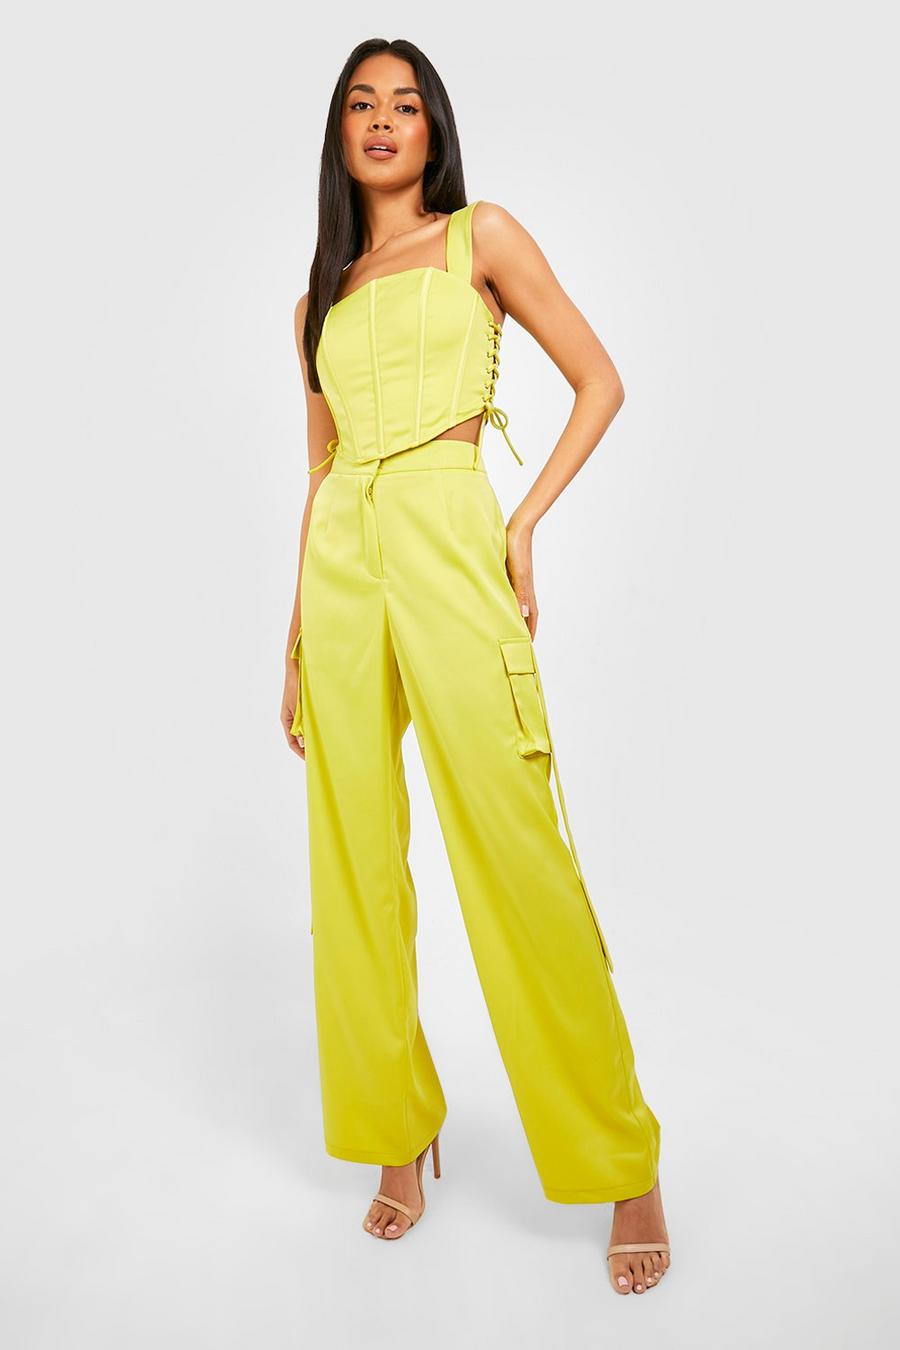 Chartreuse yellow Textured Satin Luxe Cargo Pants